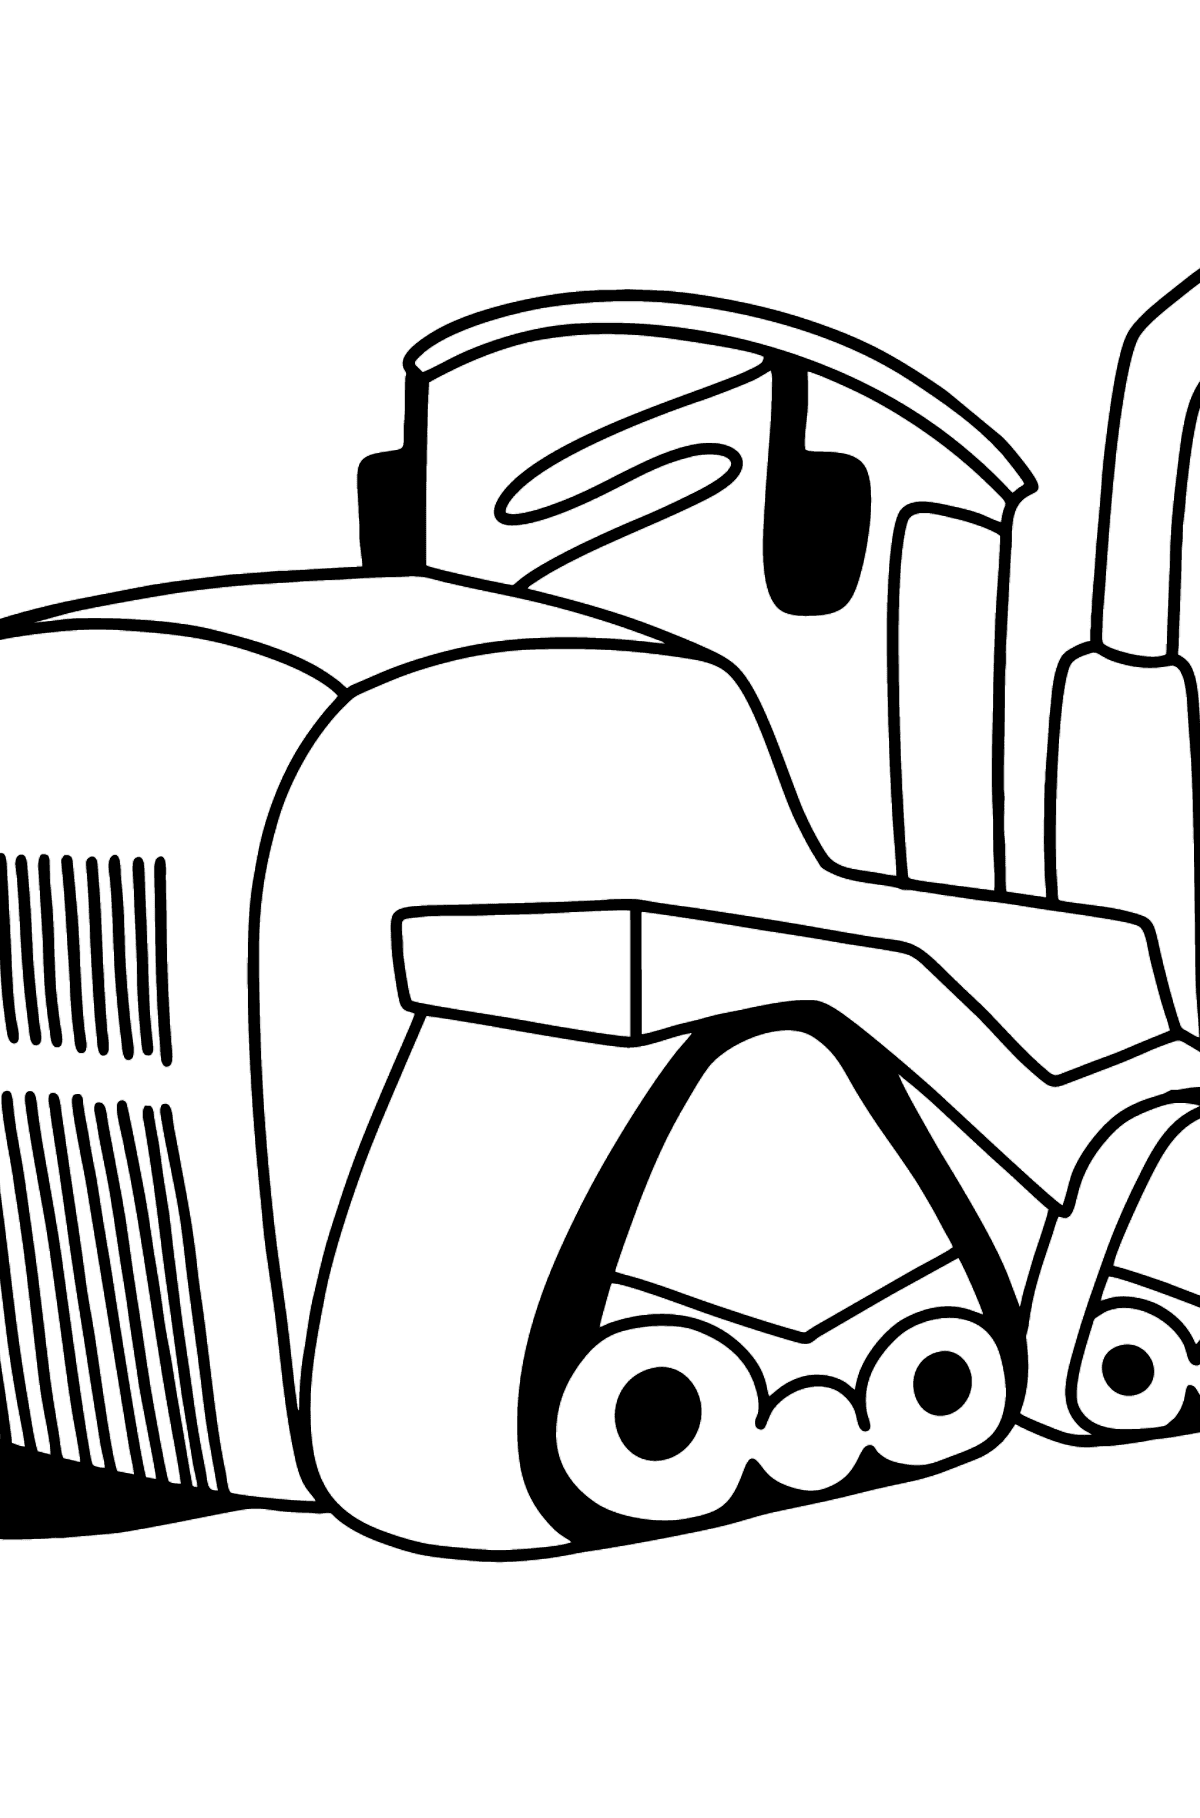 Big Heavy Tractor coloring page ♥ Online, and Print for Free!